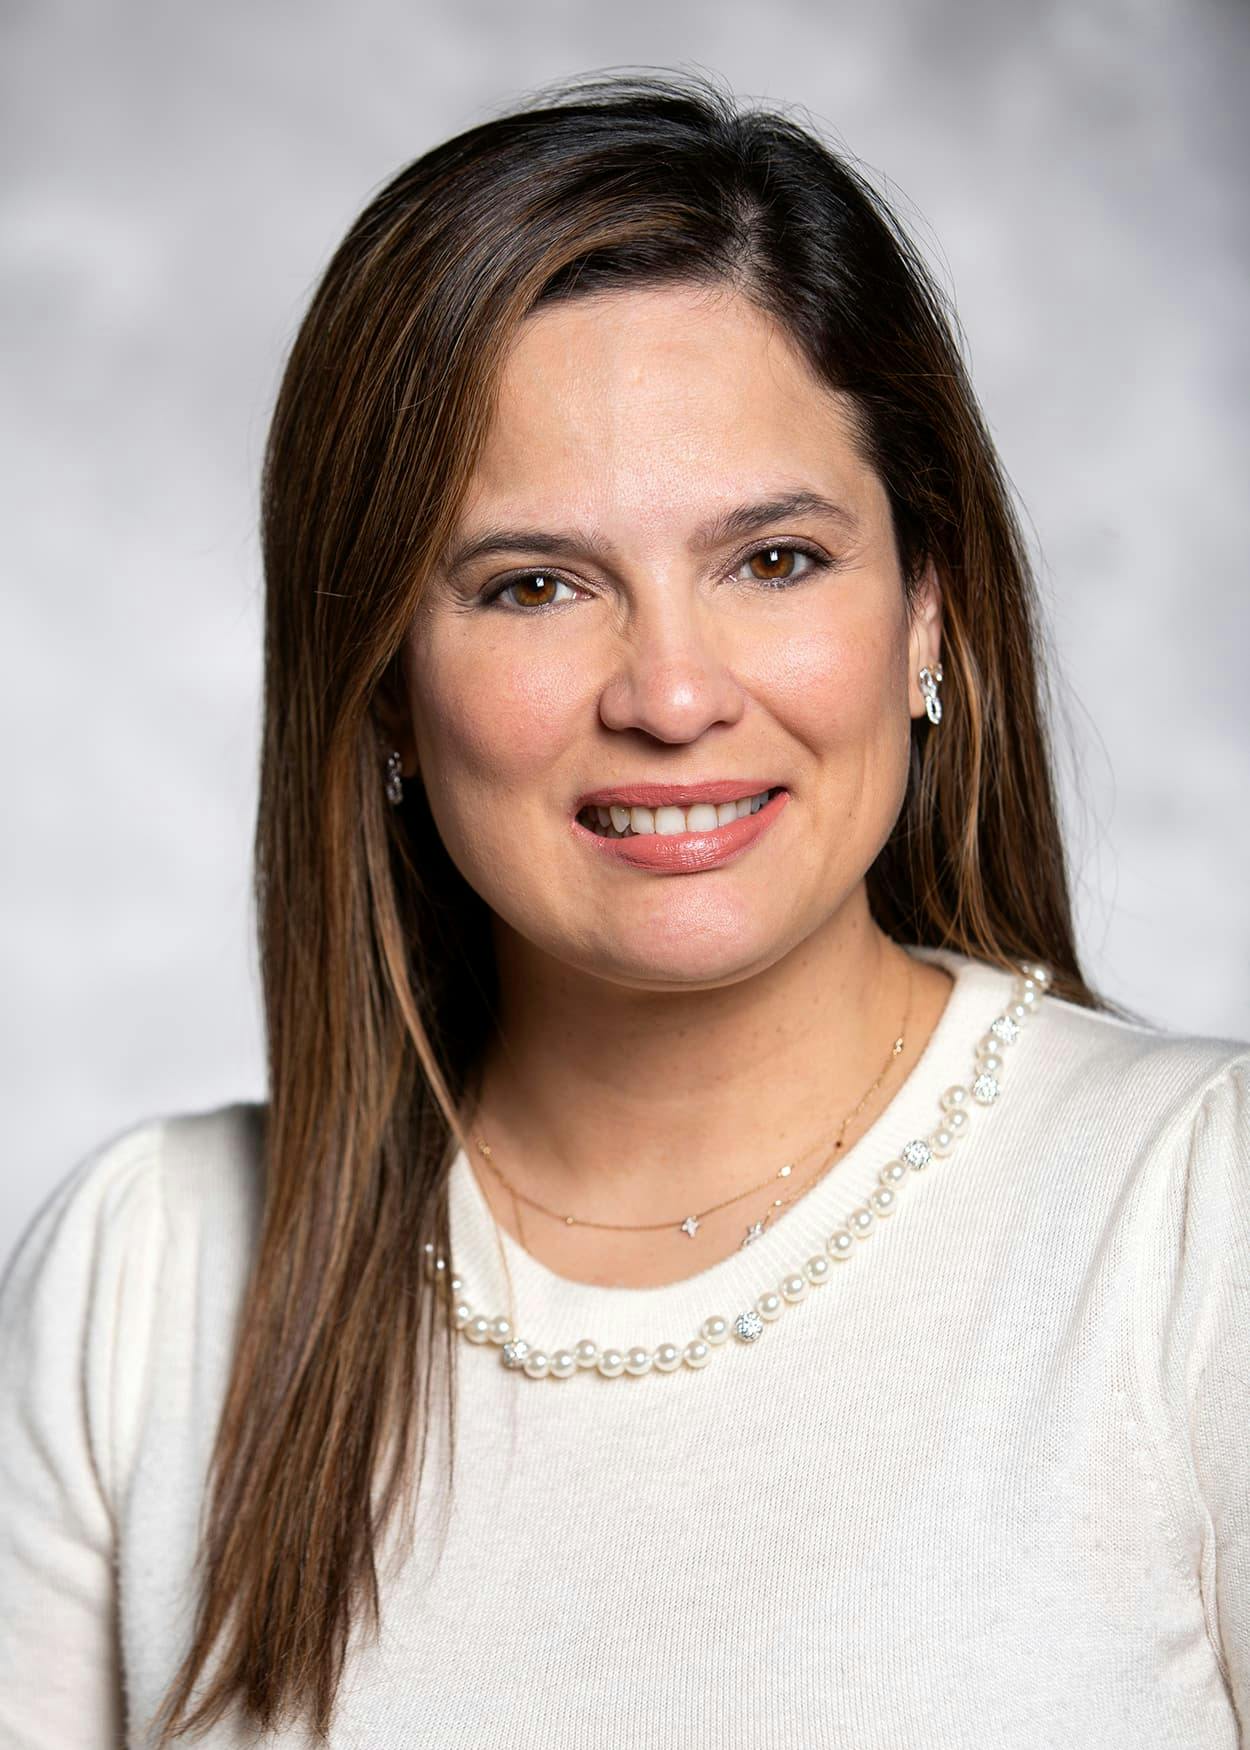 Ticiana Leal, MD

Associate Professor

Director, Thoracic Medical Oncology Program

Department of Hematology and Medical Oncology

Emory University School of Medicine

Atlanta, GA